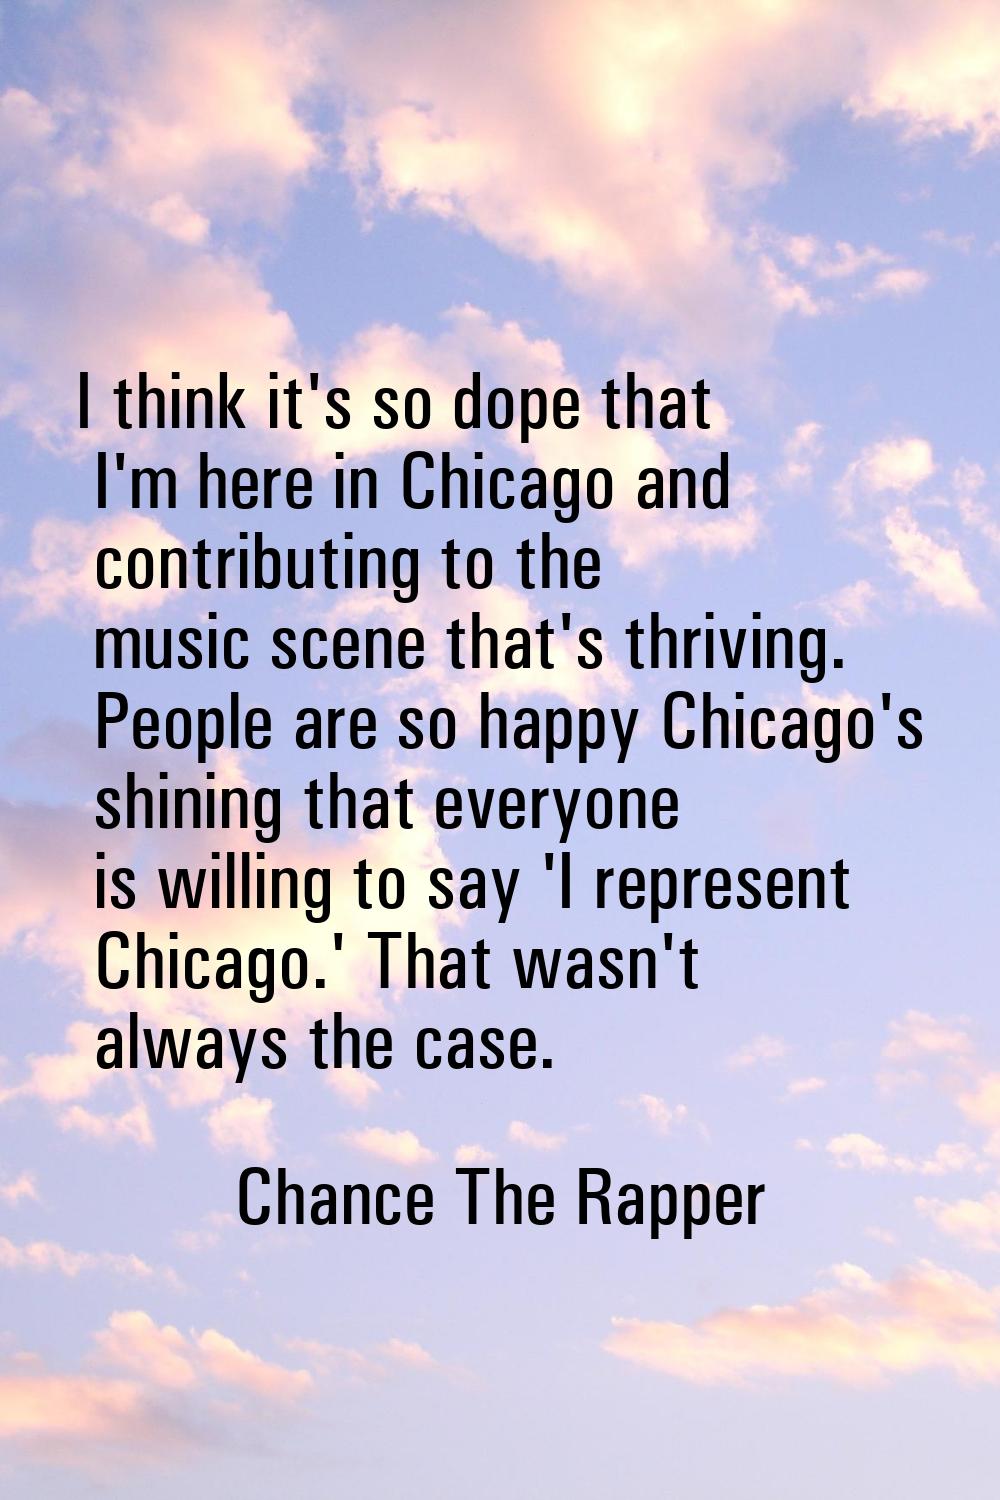 I think it's so dope that I'm here in Chicago and contributing to the music scene that's thriving. 